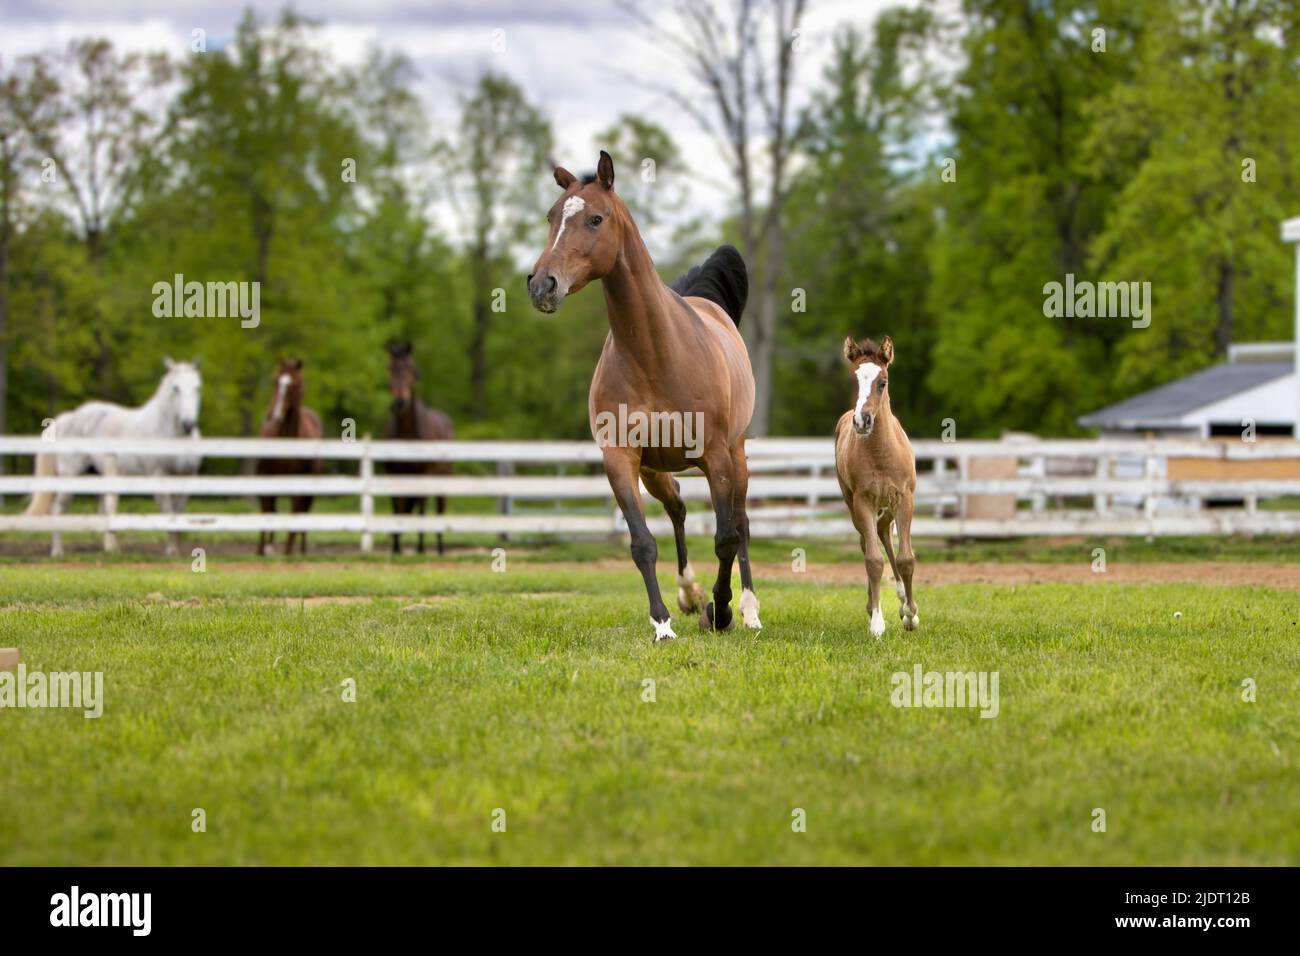 A horse and her foal running in a pasture. Stock Photo